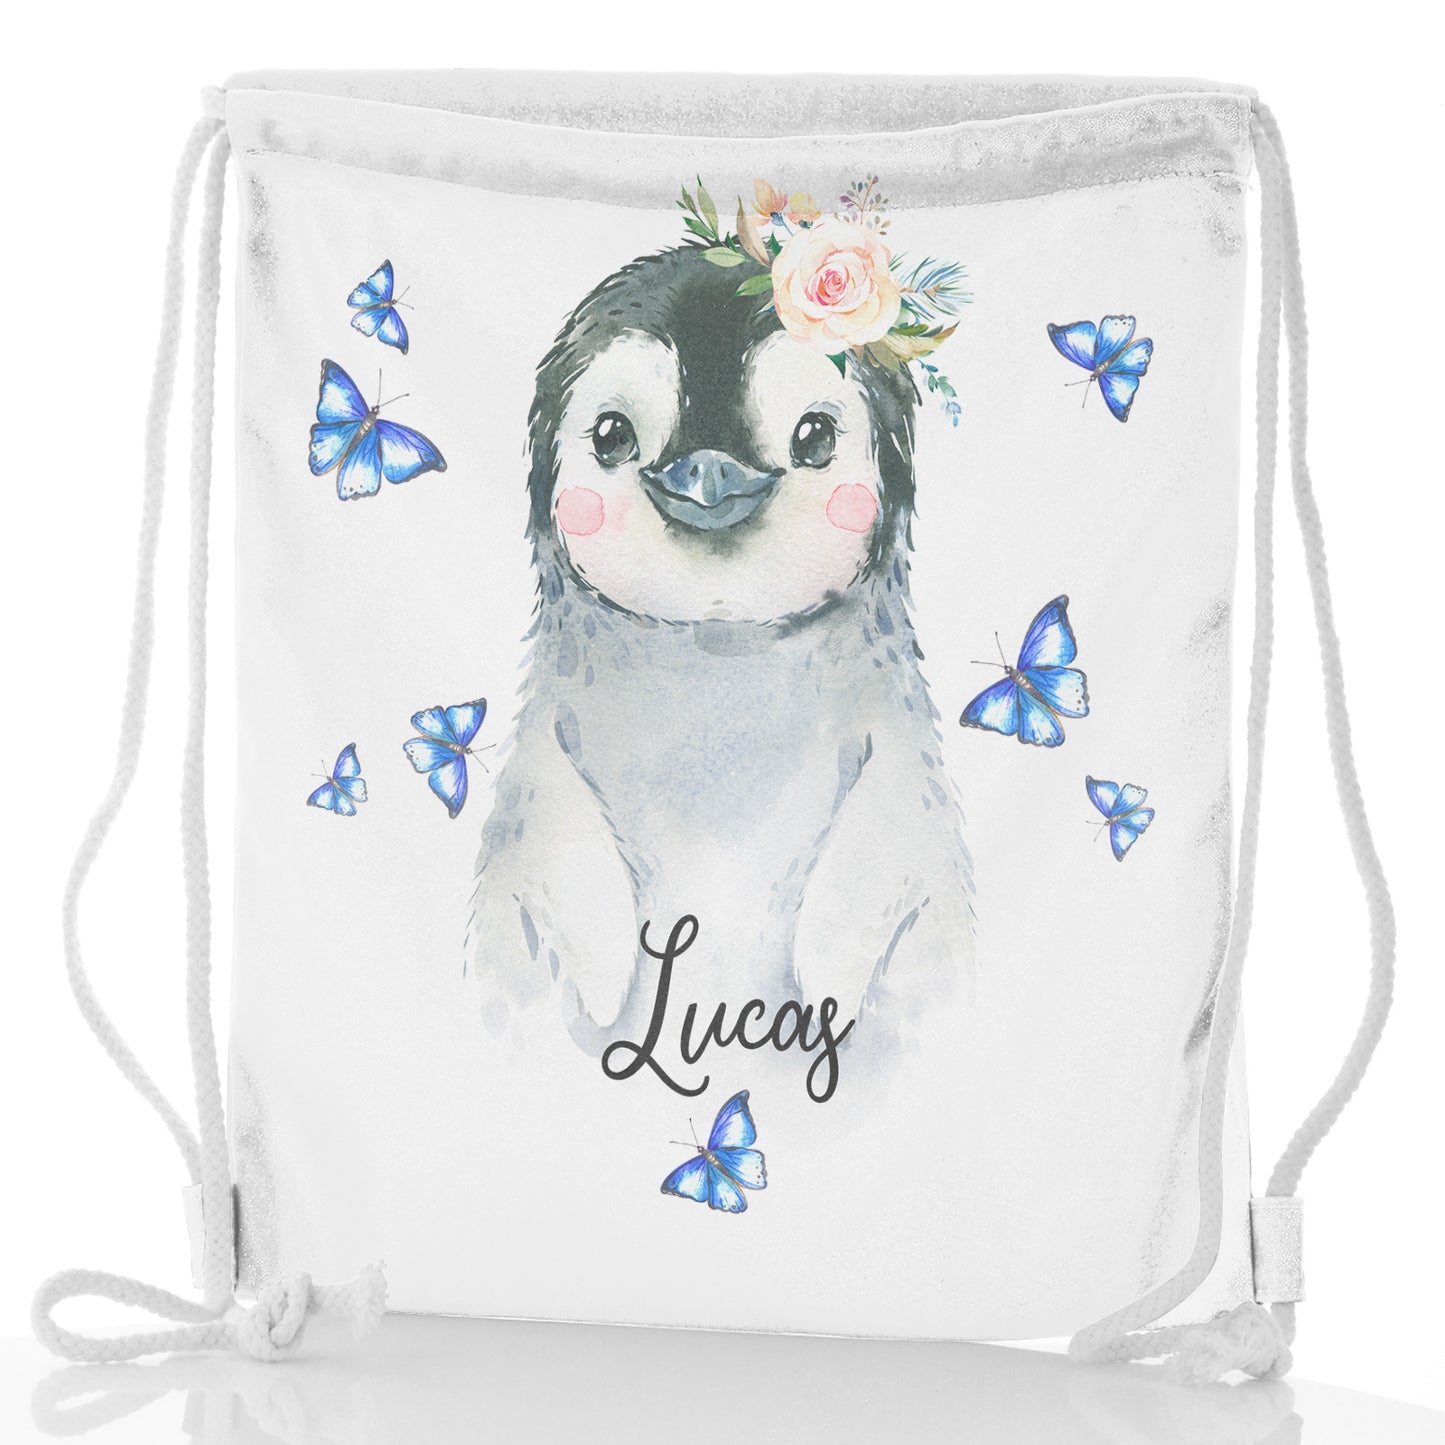 Personalised Glitter Drawstring Backpack with Grey Penguin Blue Butterflies and Cute Text